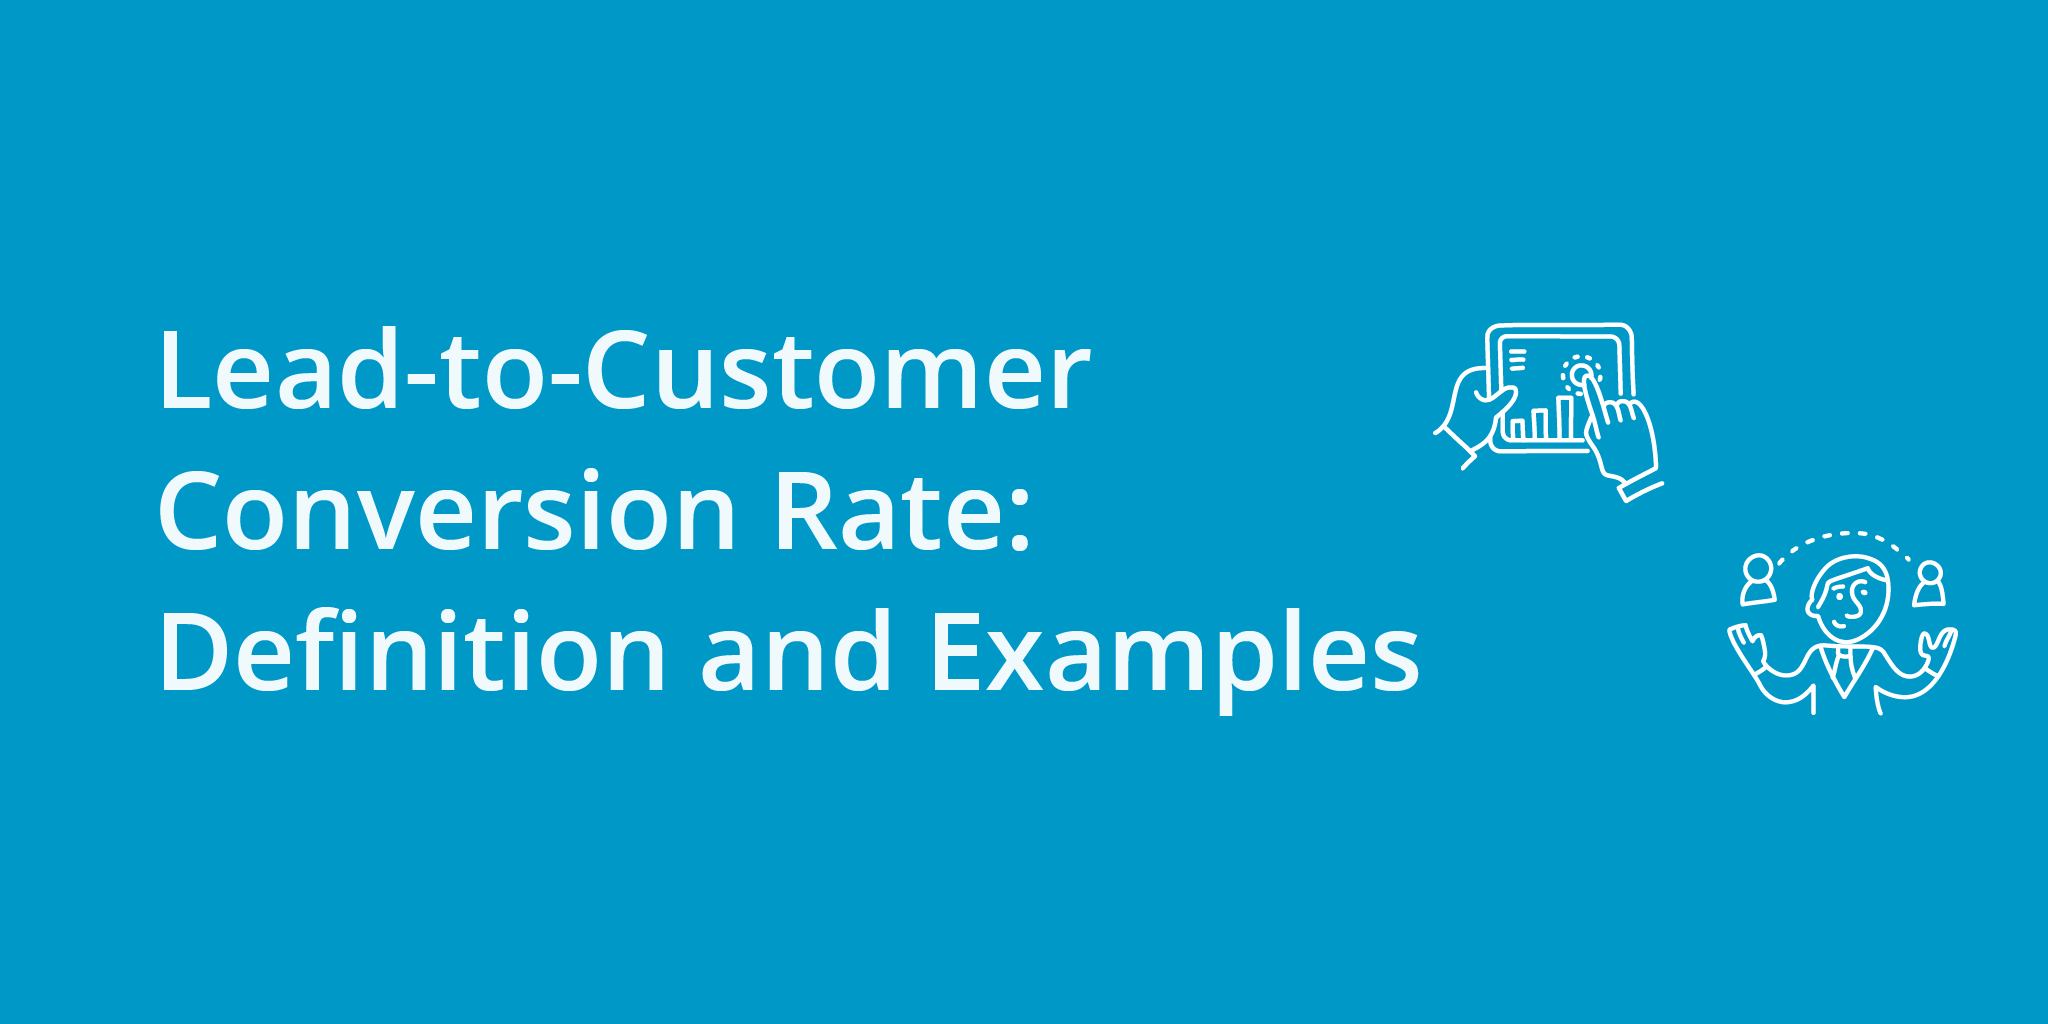 What is Lead-to-Customer Conversion Rate? | Telephones for business